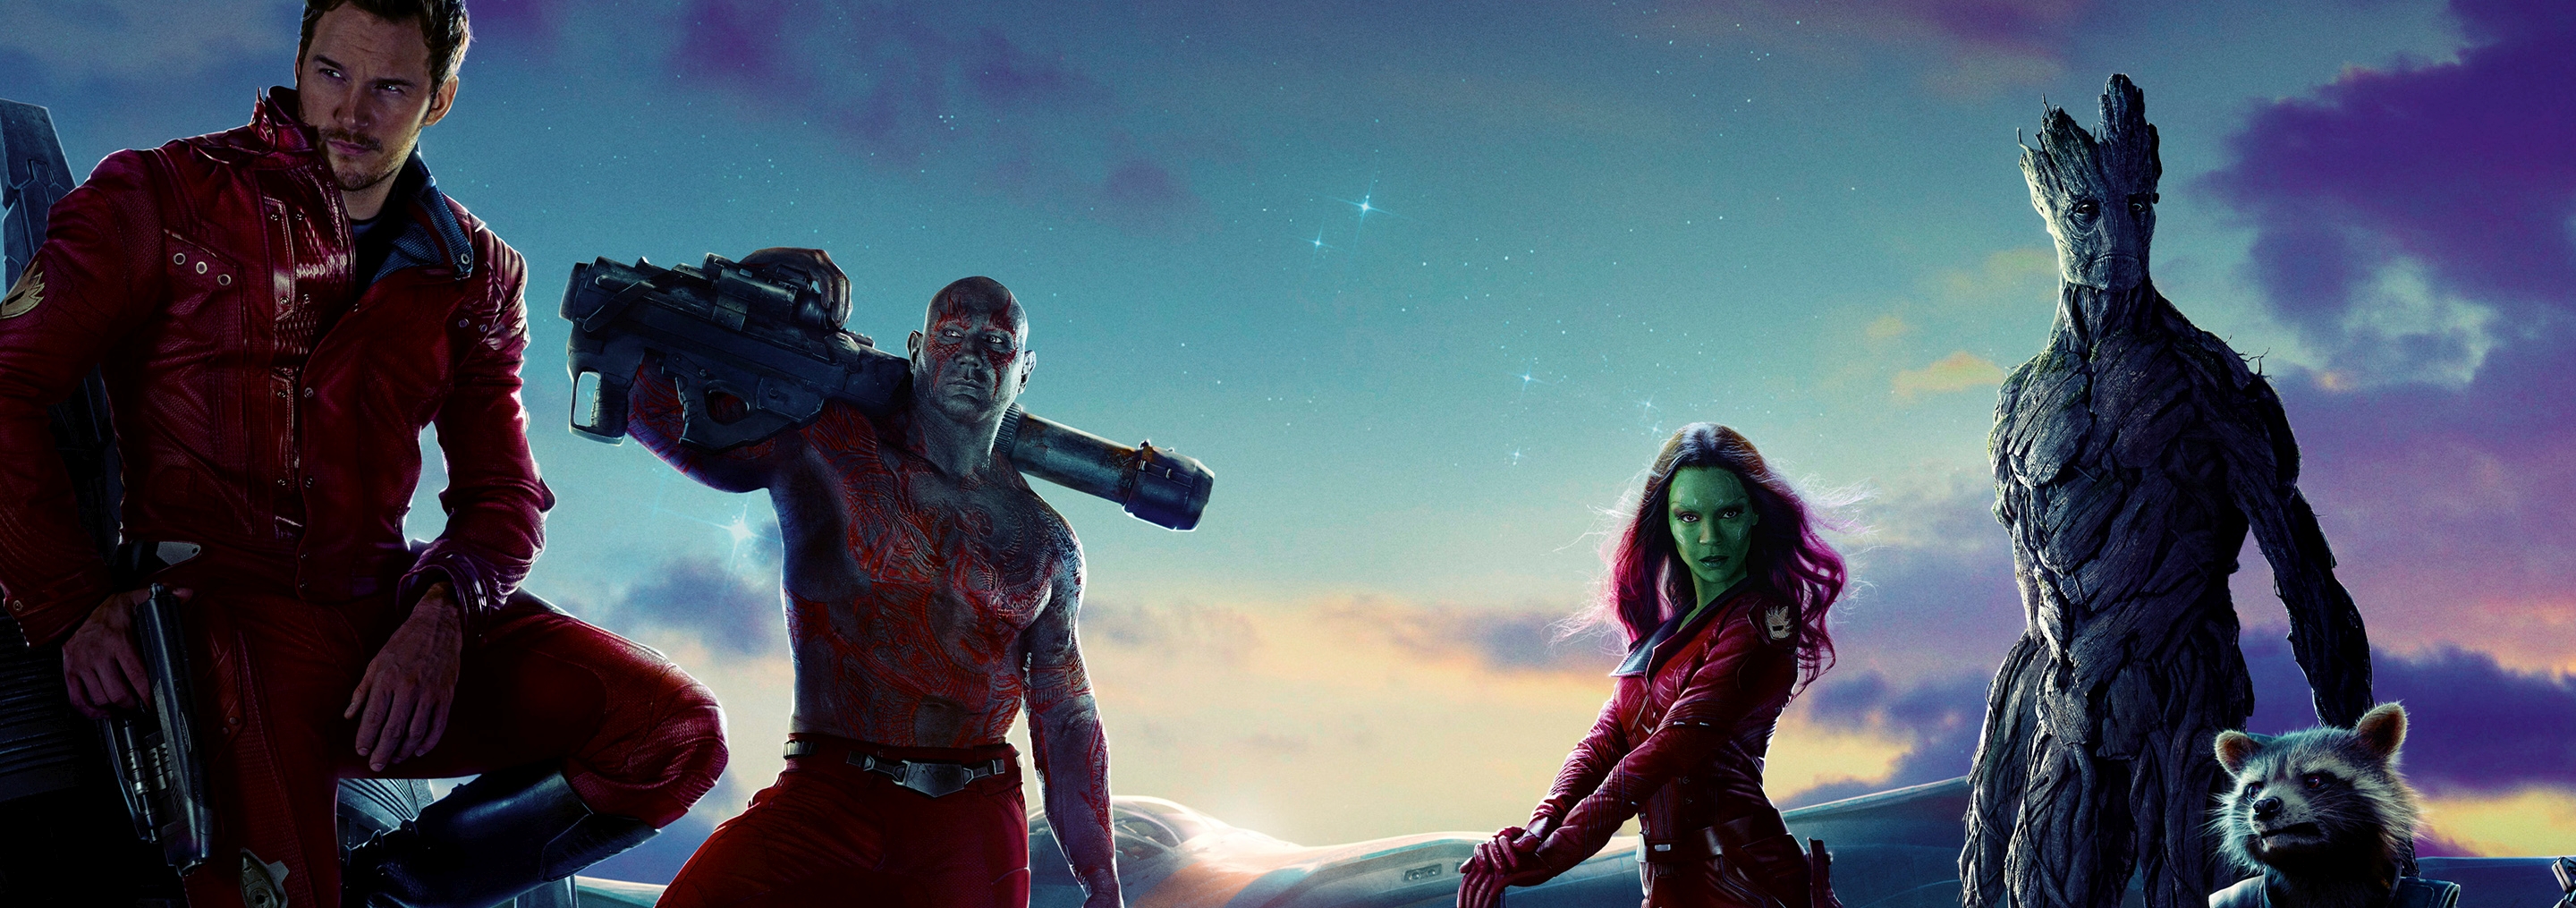 Guardians of the Galaxy Blu-ray SteelBook is hitting the UK from Zavvi